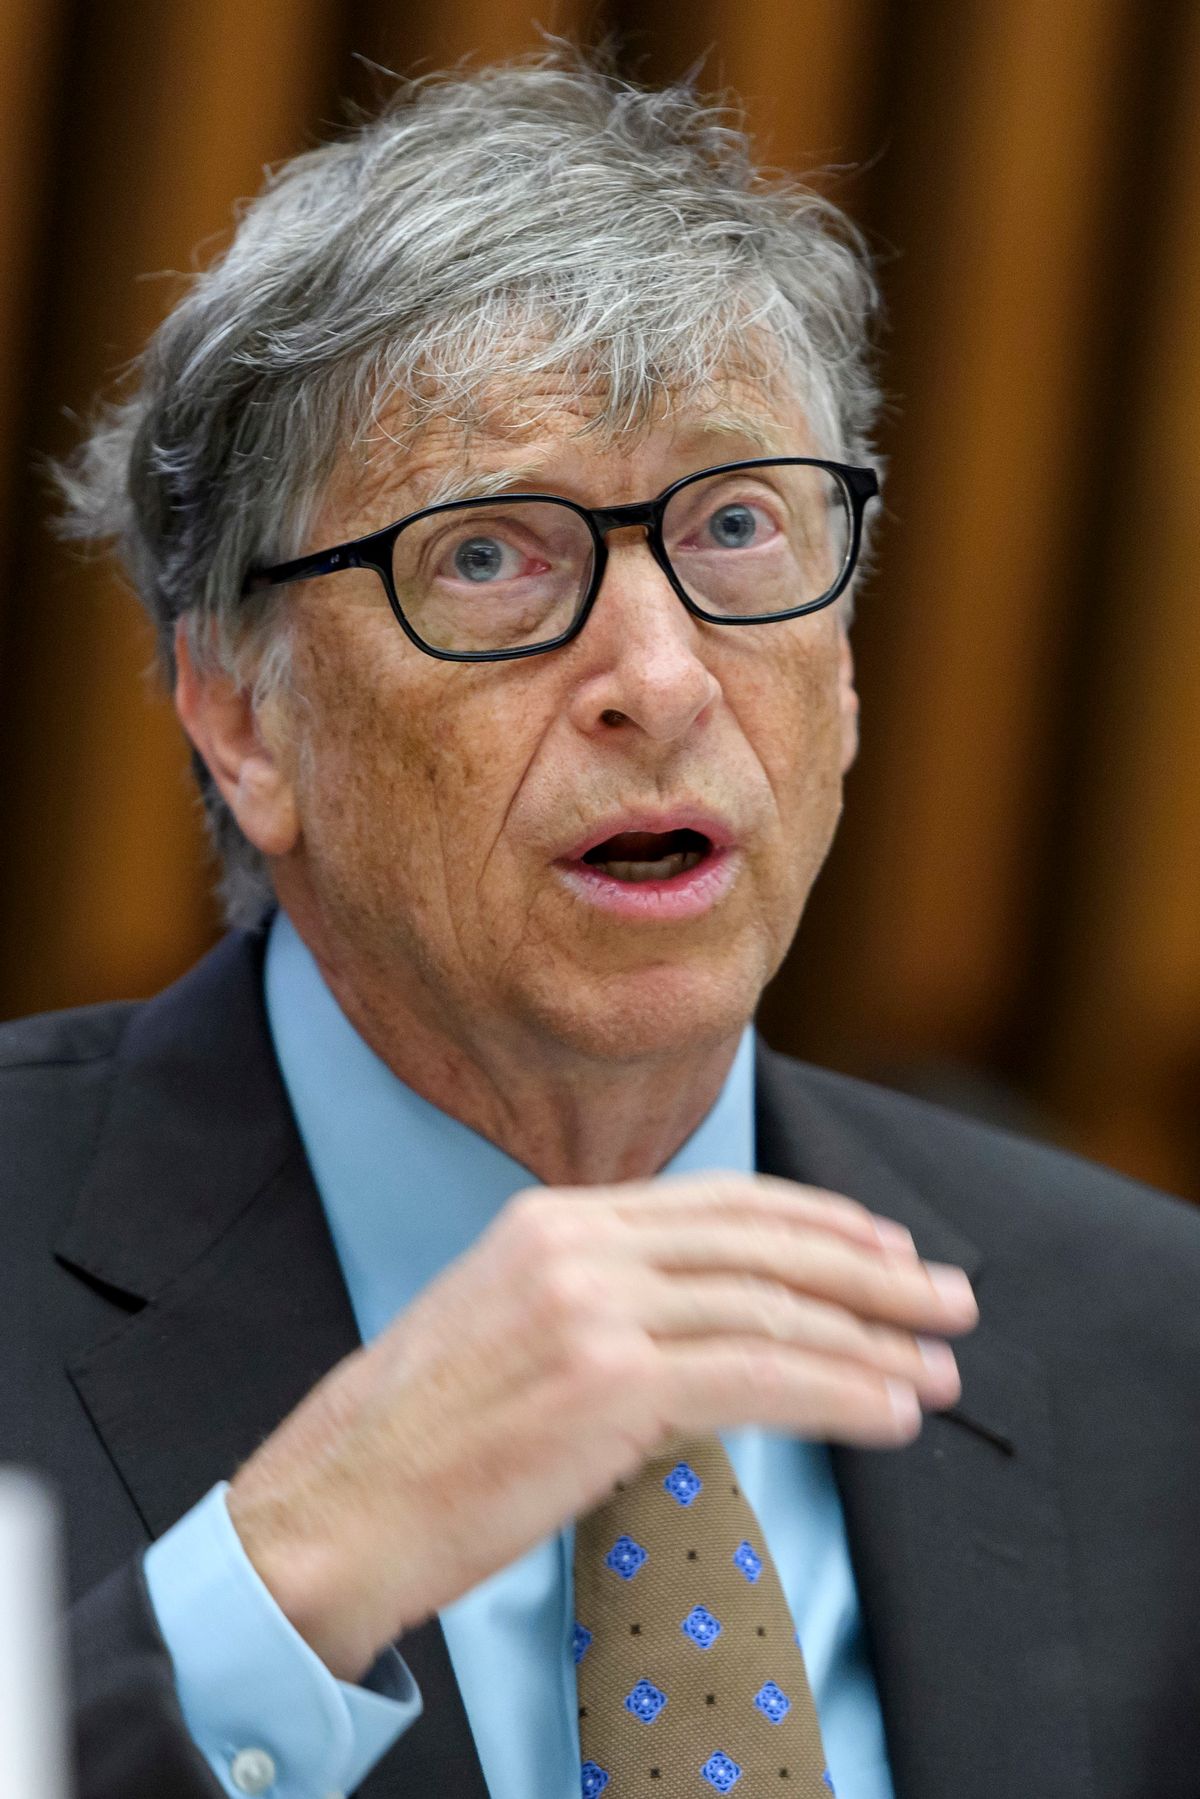 Bill Gates, Microsoft Co-Founder and Co-Chair of the Bill and Melinda Gates Foundation, speaks during the Global partners meeting on neglected tropical diseases, NTD, at the World Health Organization headquarters in Geneva, Switzerland, on Wednesday, April 19, 2017. (Martial Trezzini/Keystone via AP) (AP)